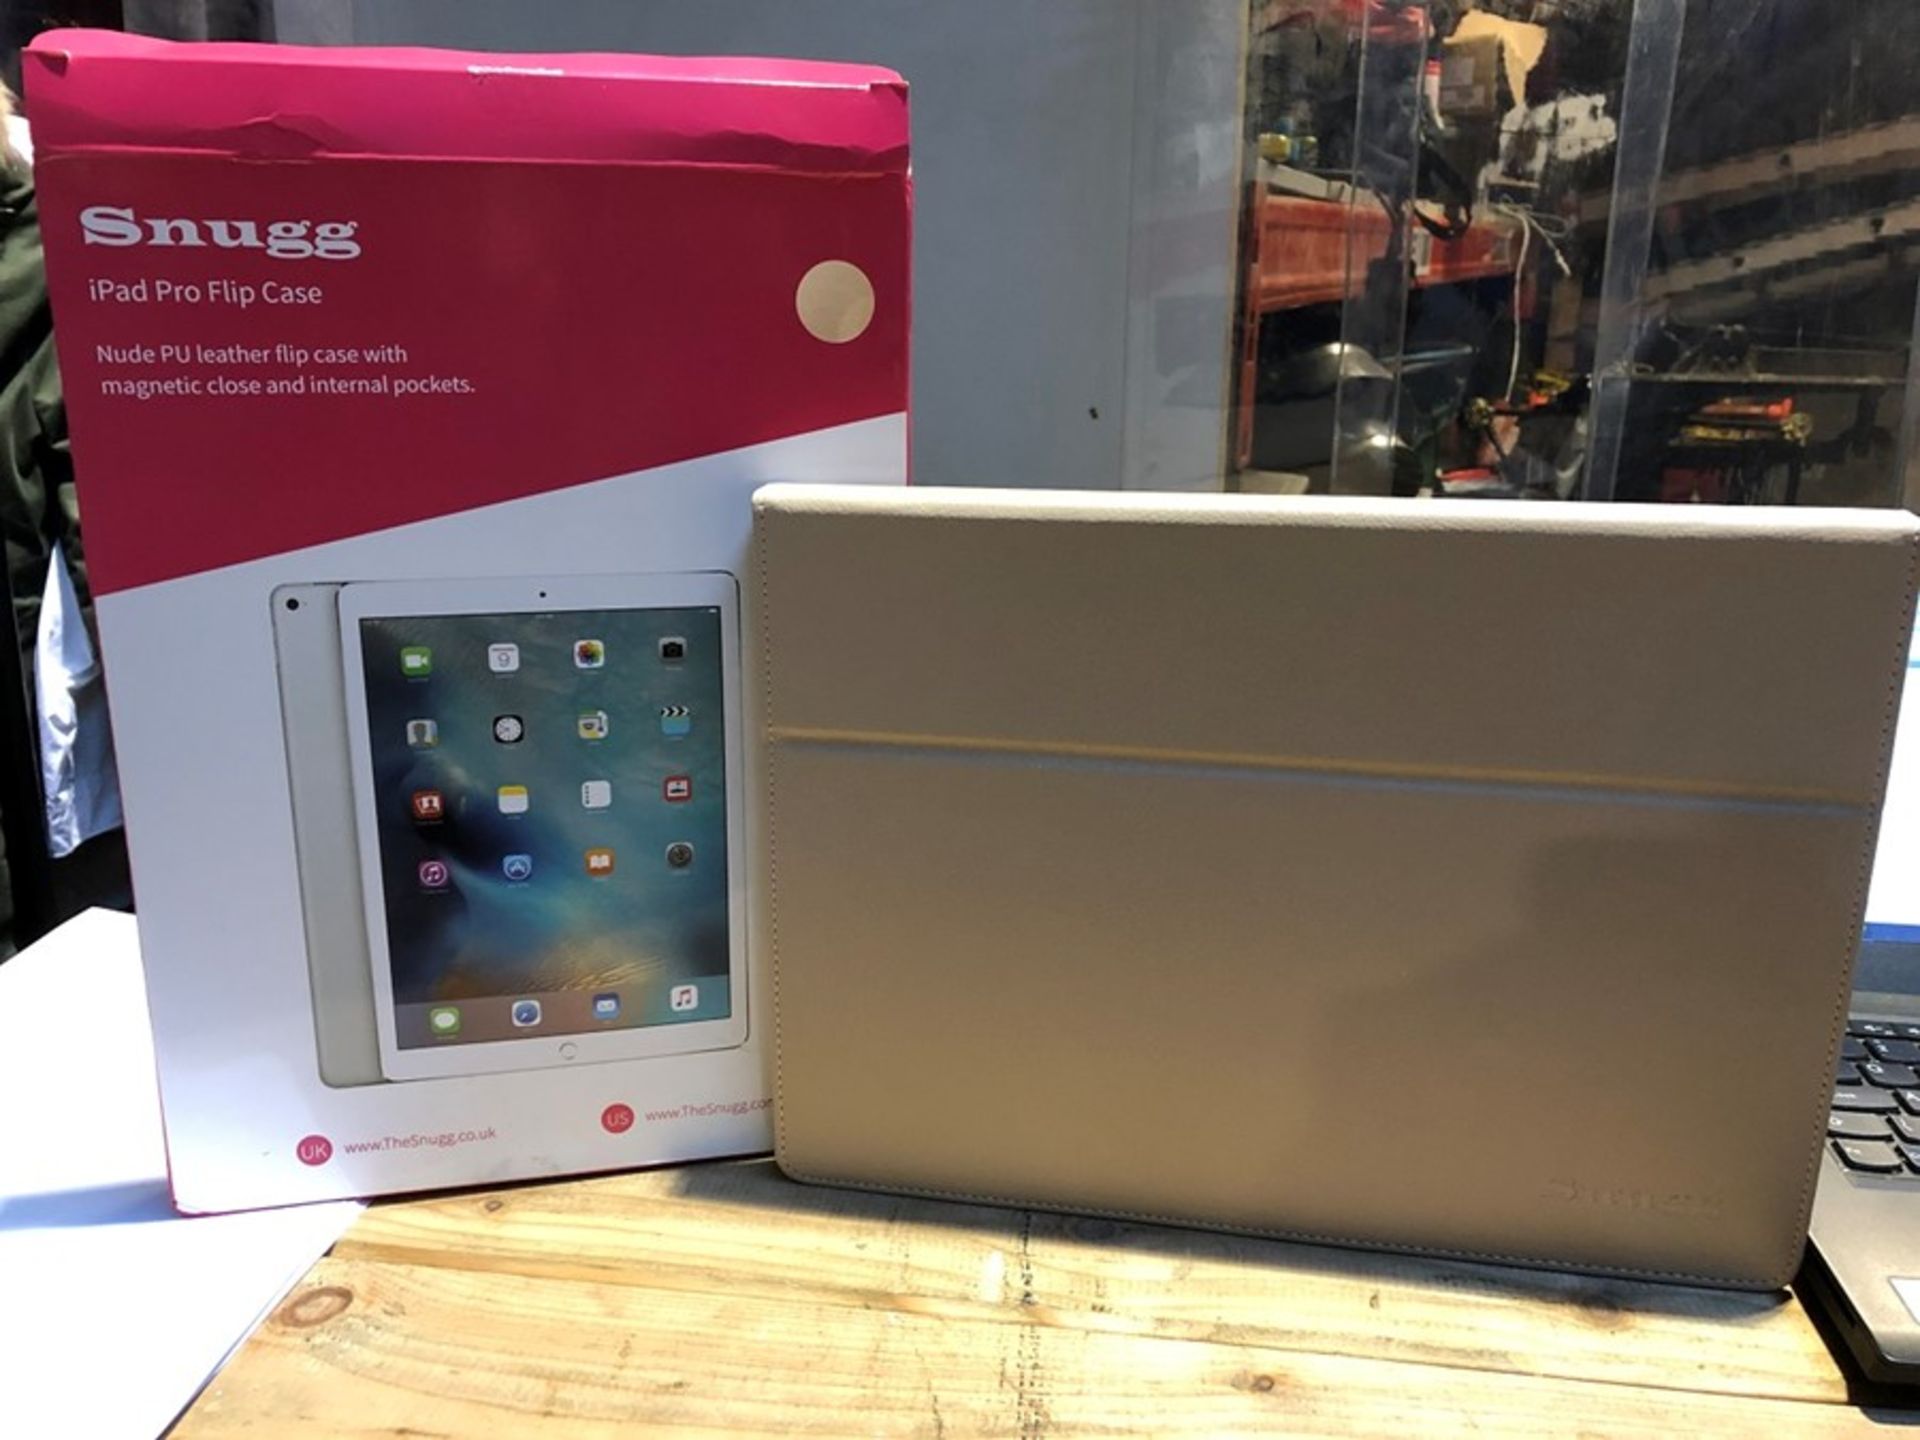 1 BOXED SNUGG IPAD PRO FLIP CASE 12.9 INCH IN BEIGE / RRP £24.99 (PUBLIC VIEWING AVAILABLE)